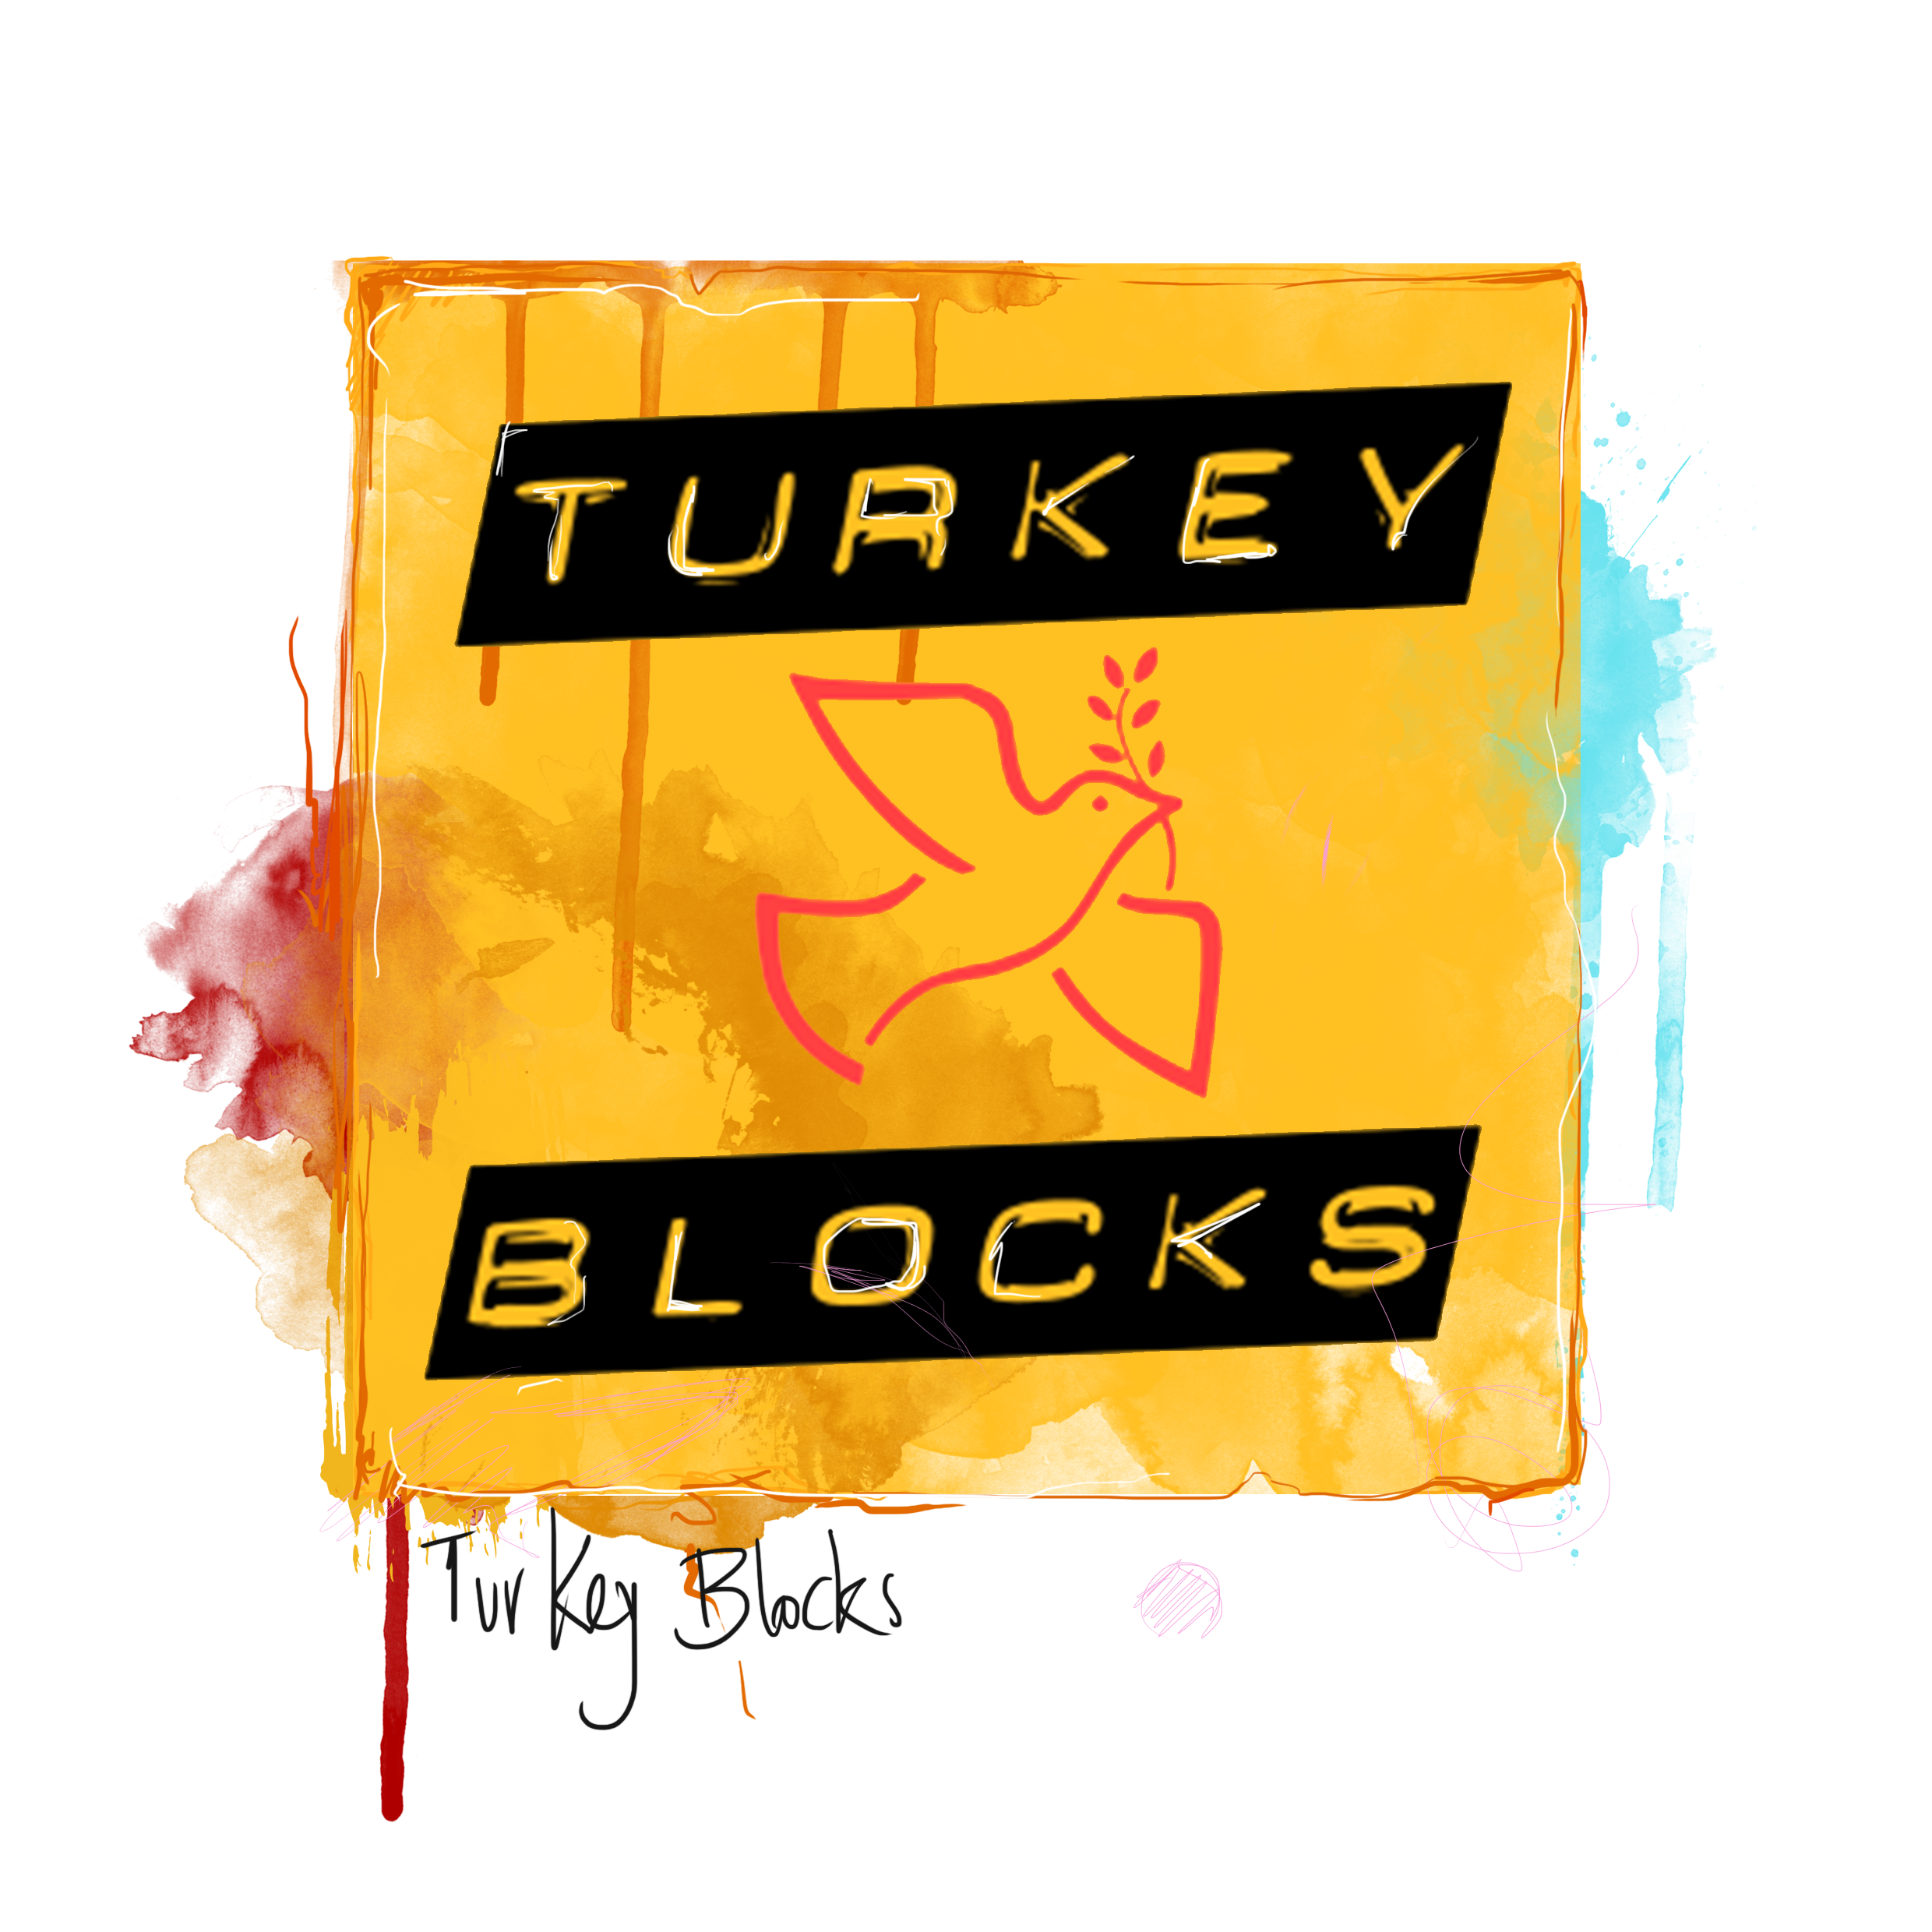 Turkey Blocks is the 2017 Freedom of Expression Awards Digital Activism Fellow